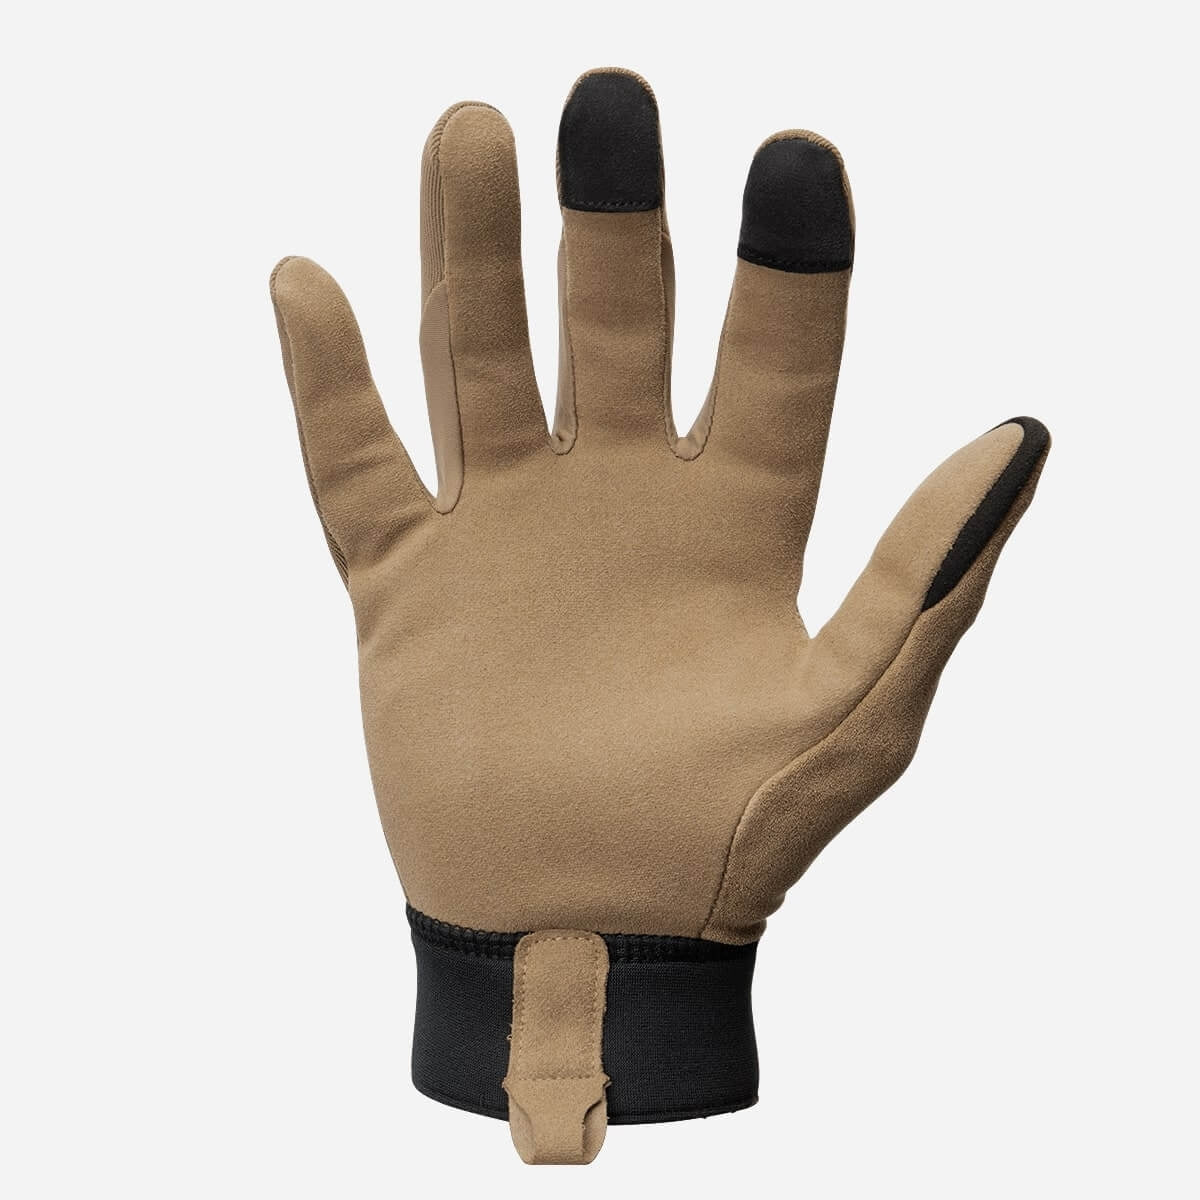 Magpul Technical Glove 2.0 Coyote Large